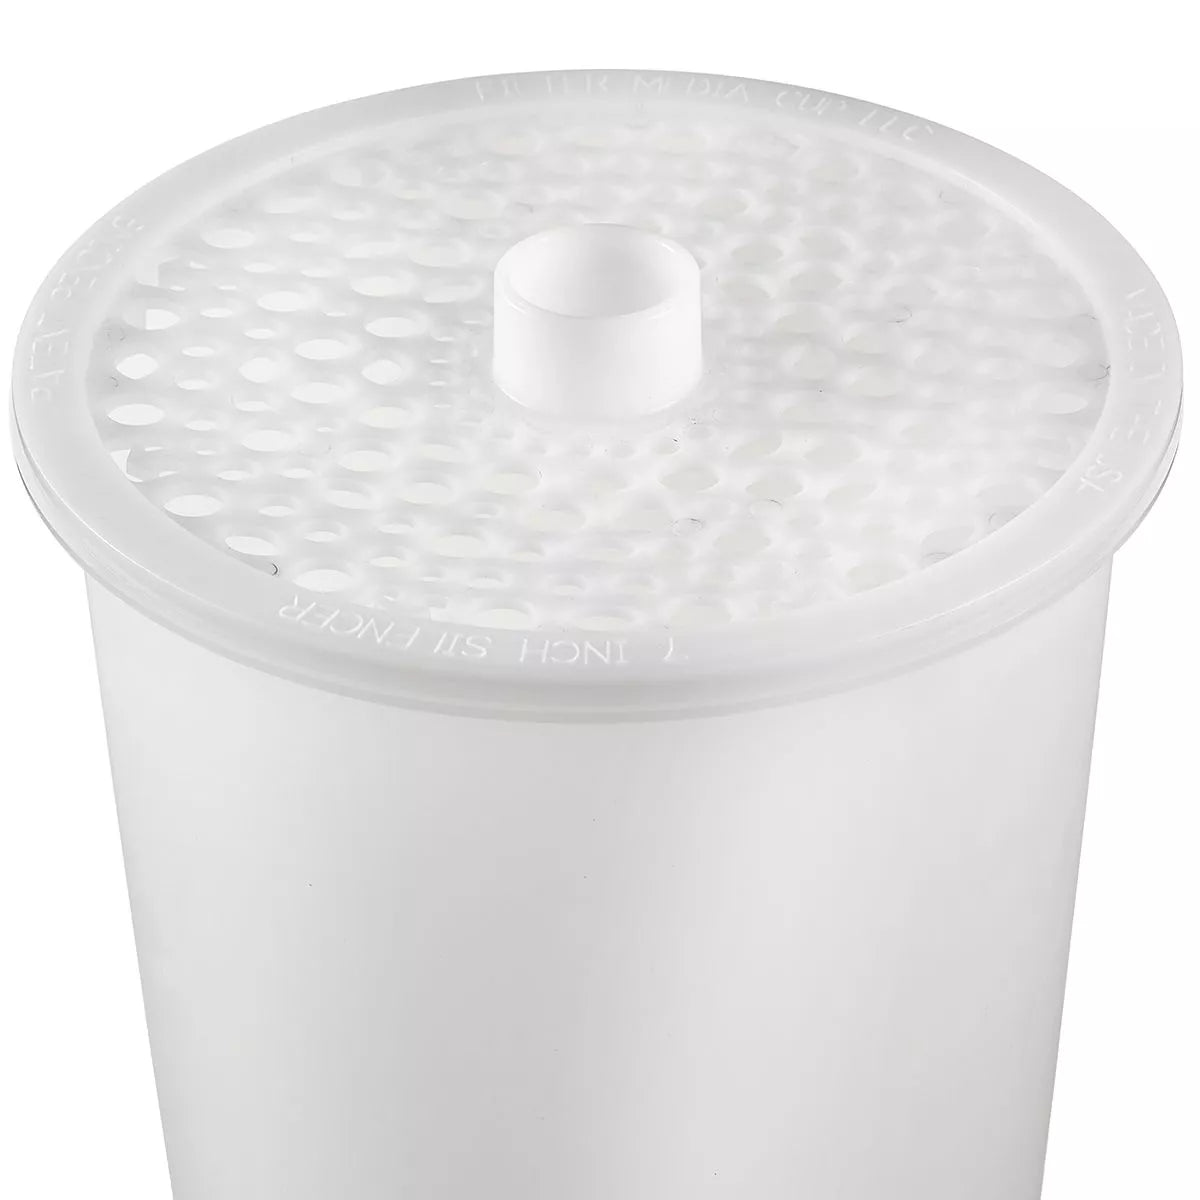 Filter Media Cup Silencer (Lid Only) - Sea Foam White - 7 inch - Media Cup